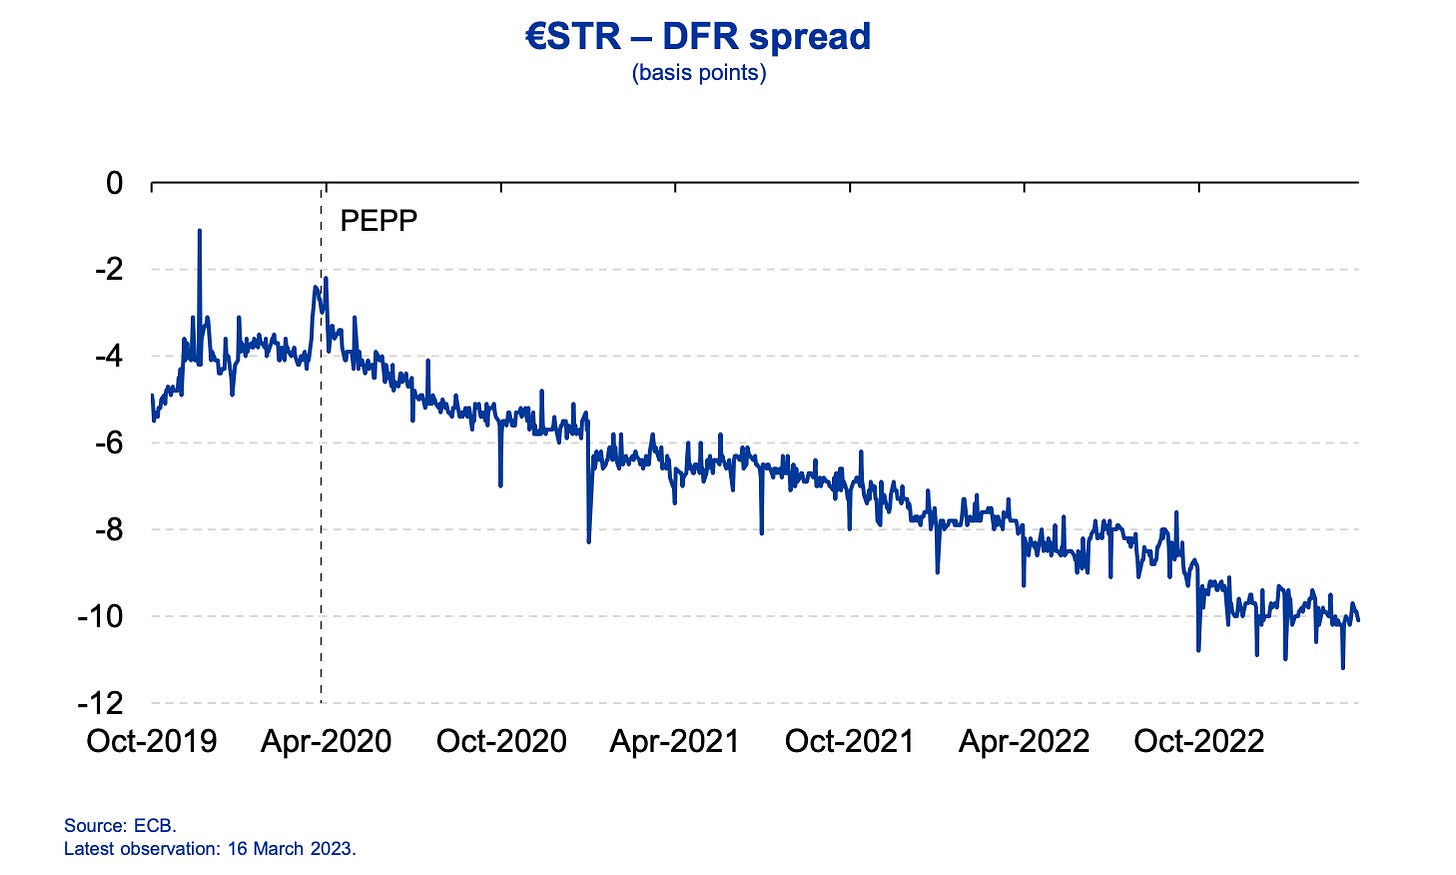 The large increase in reserves is result from PEPP and TLTROs has made the floor in the euro area more and more leaky, with the euro area’s benchmark interest rate, €STR, increasingly decoupling from the DFR.